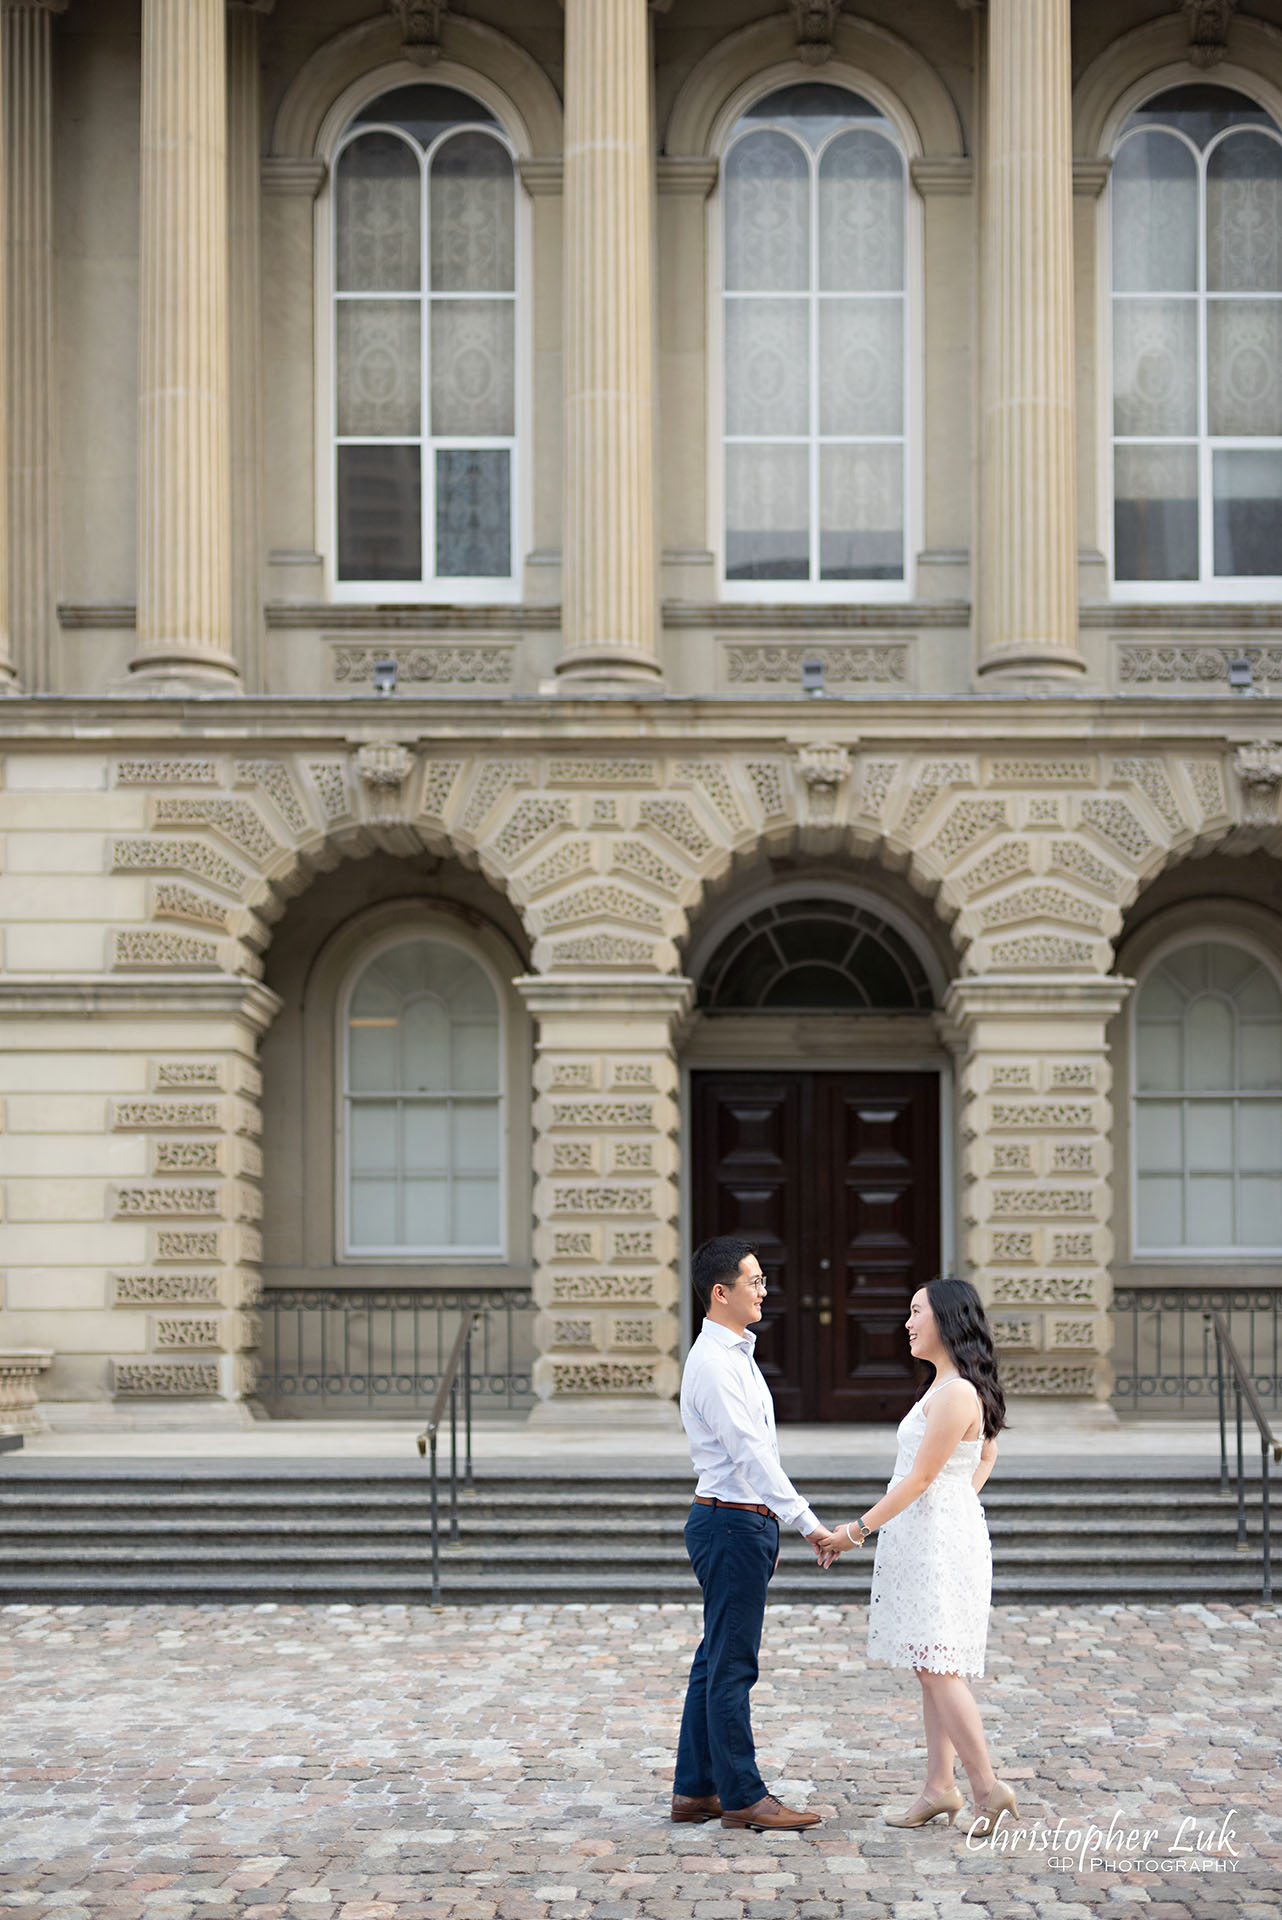 Christopher Luk Wedding Photographer Osgoode Hall Toronto Bride Groom Main Historic Building Front Cobblestone Holding Hands Walking Together Looking at Each Other PortraitChristopher Luk Wedding Photographer Osgoode Hall Toronto Bride Groom Main Historic Building Front Cobblestone Holding Hands Walking Together Looking at Each Other Portrait Natural Candid Photojournalistic